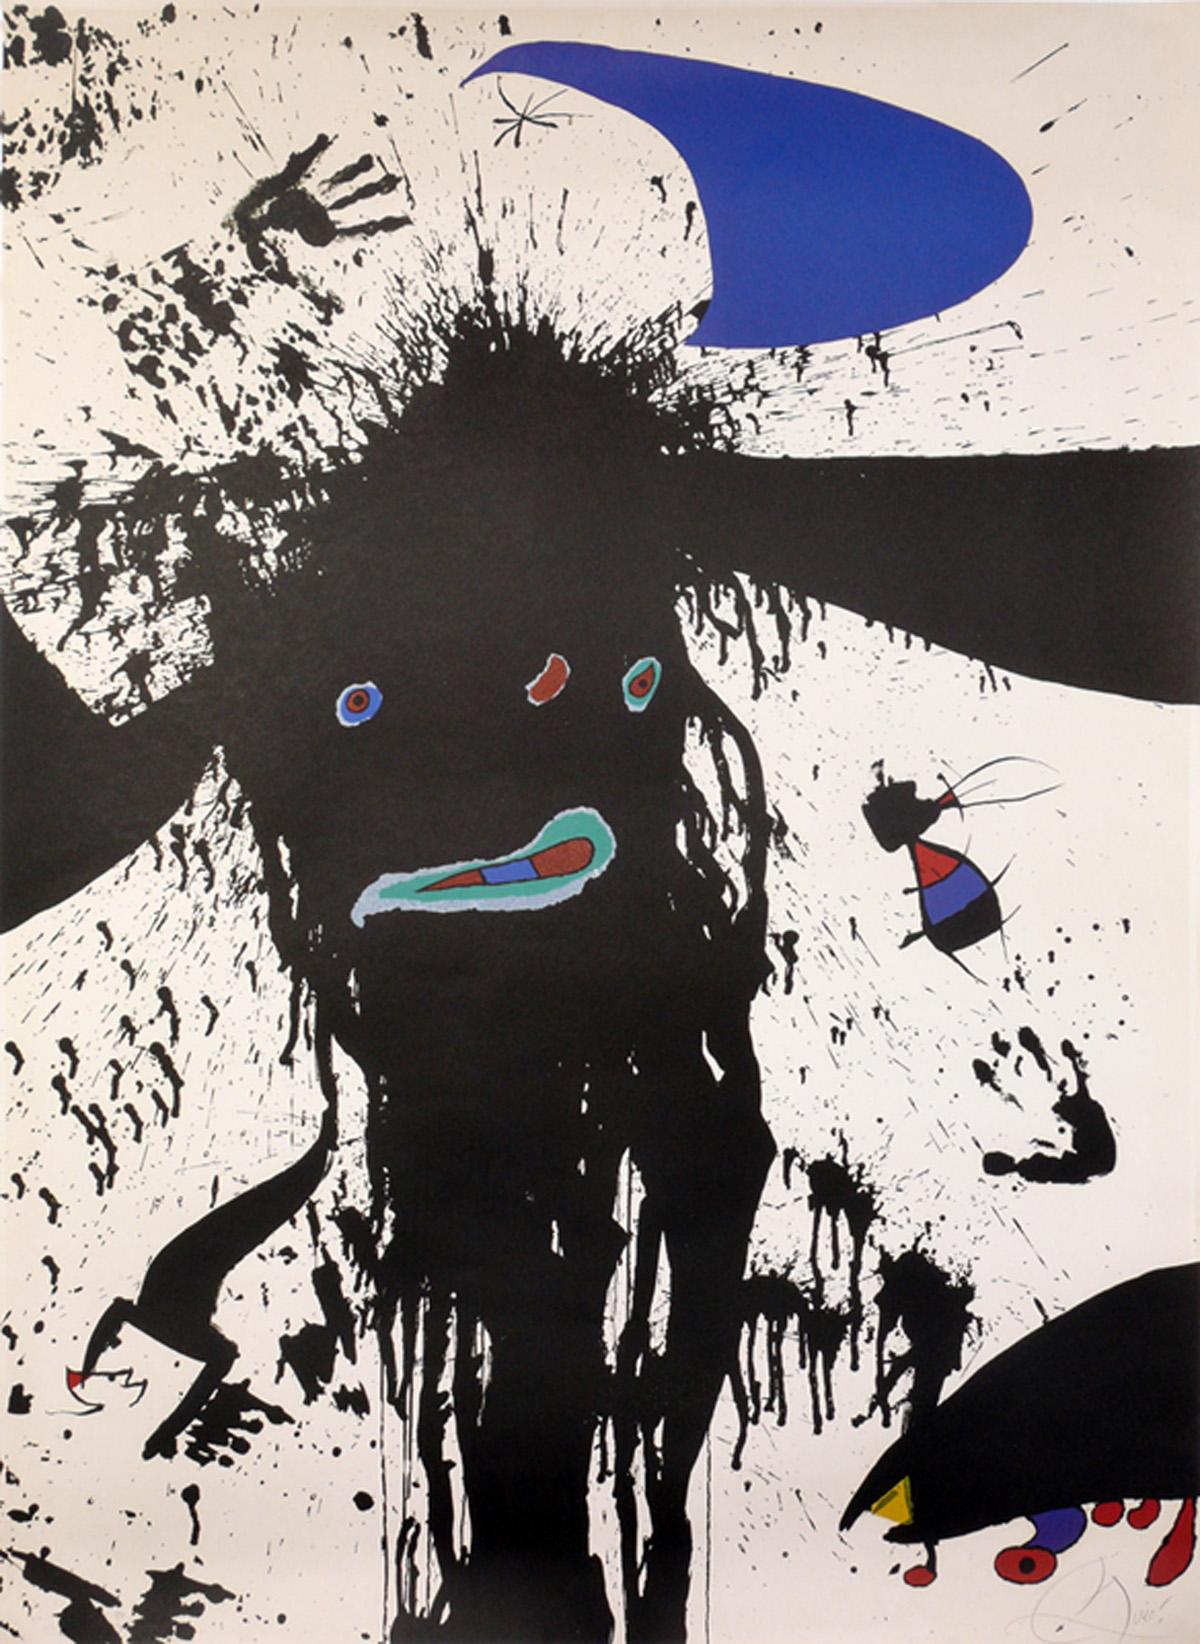 Selection of Large Scale Joan Miro Color Screenprints, French, circa 1960s.  They are priced at $850 each or $1500 for the pair. They measure an impressive 35